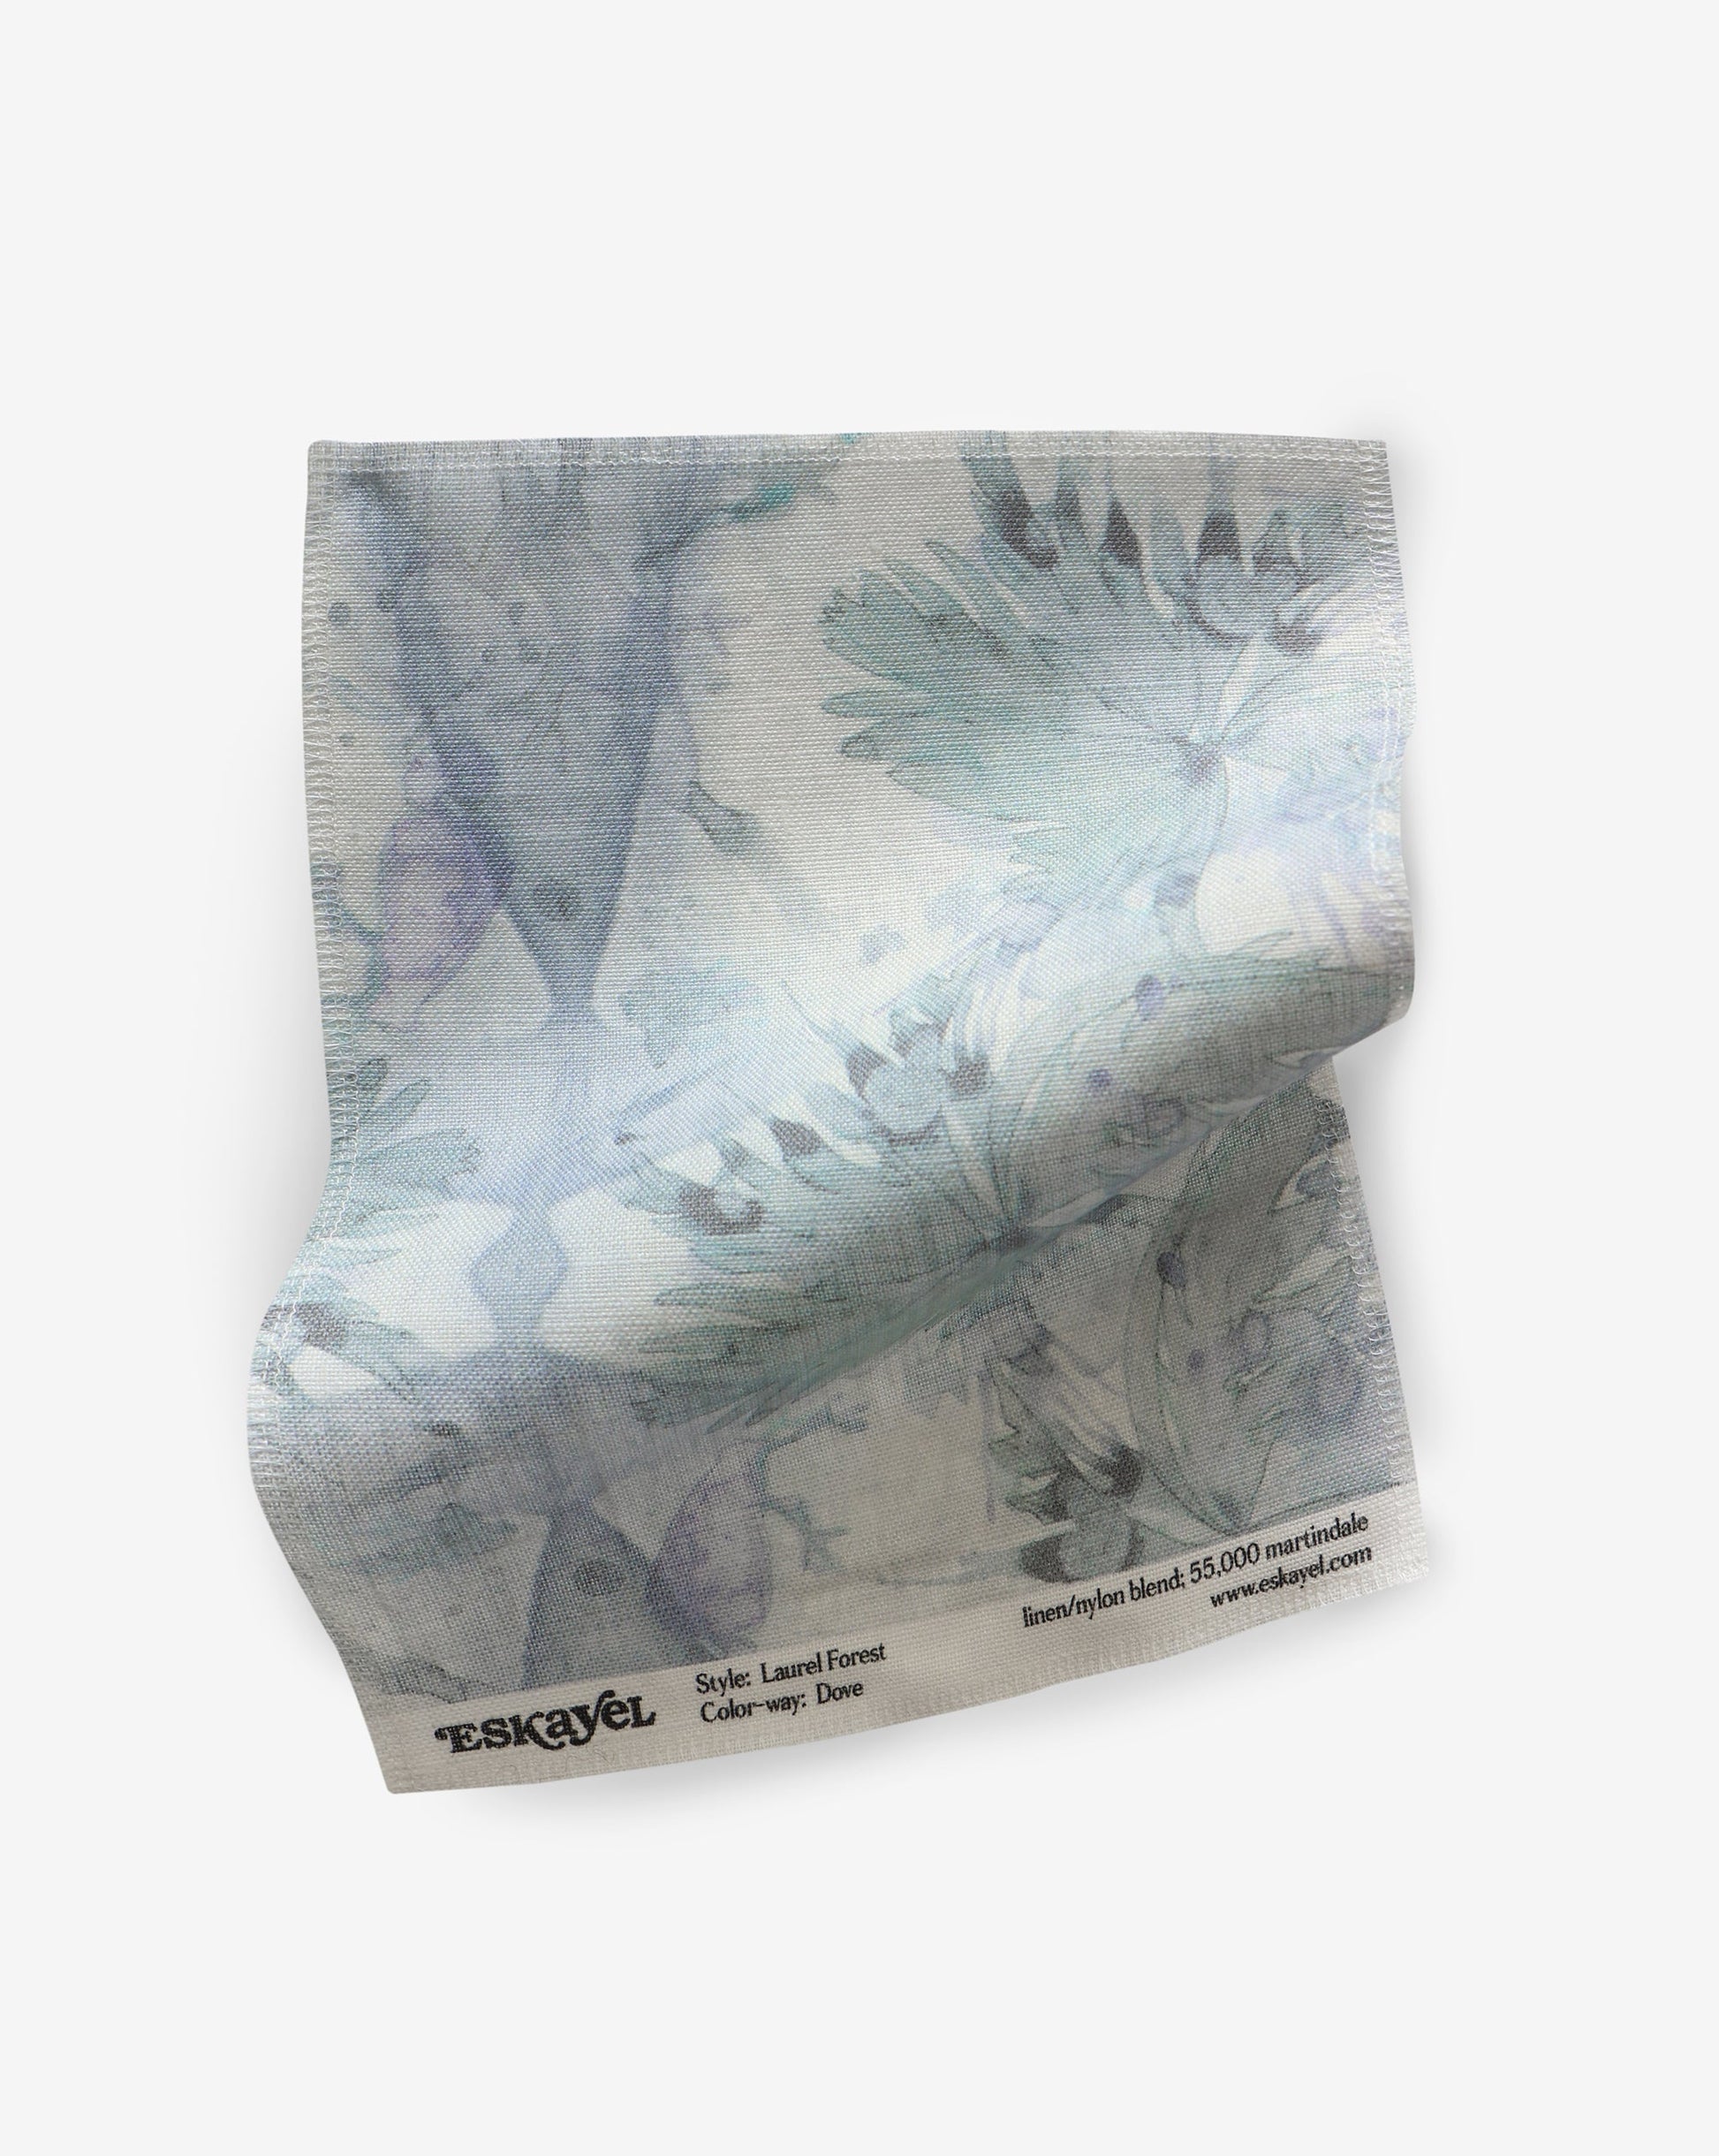 A fabric with blue and white Laurel Forest Fabric Dove on it